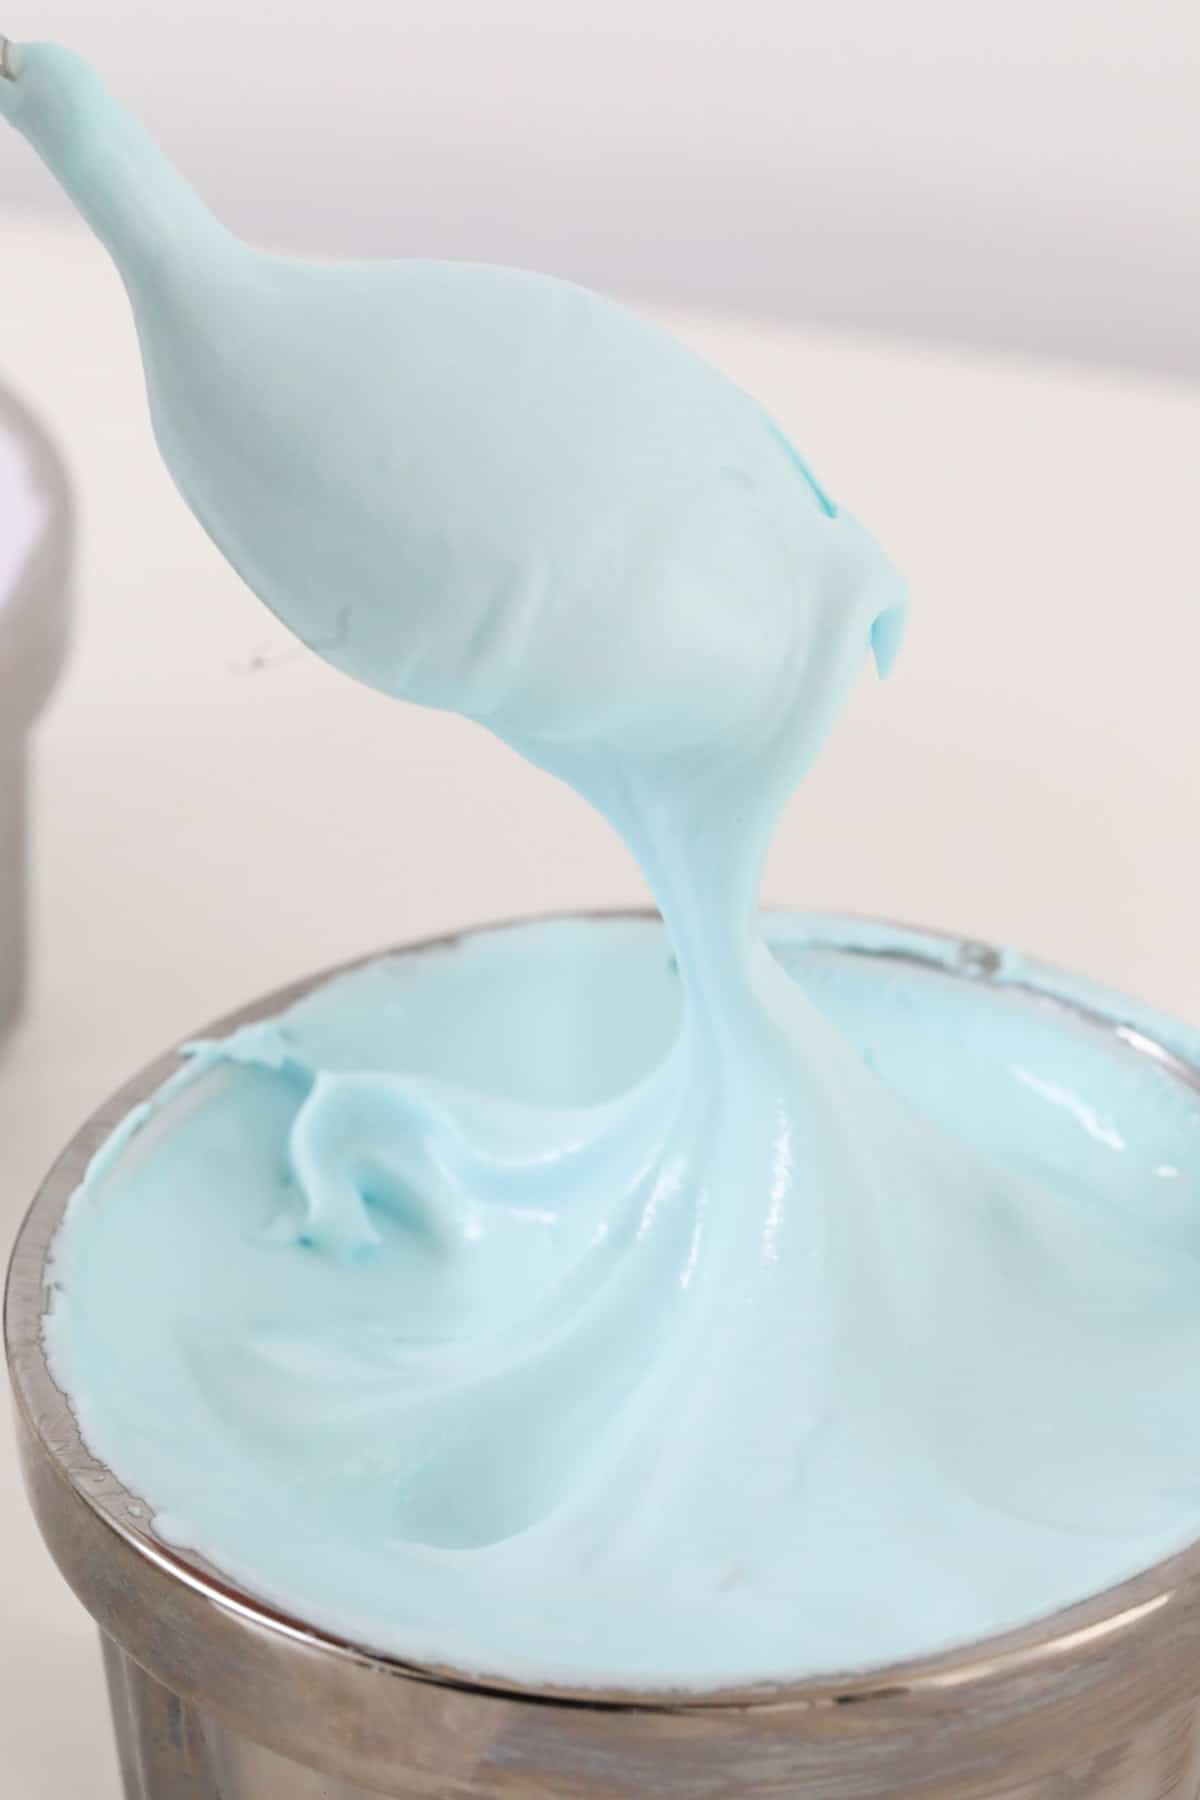 A spoon holding up some blue royal icing.